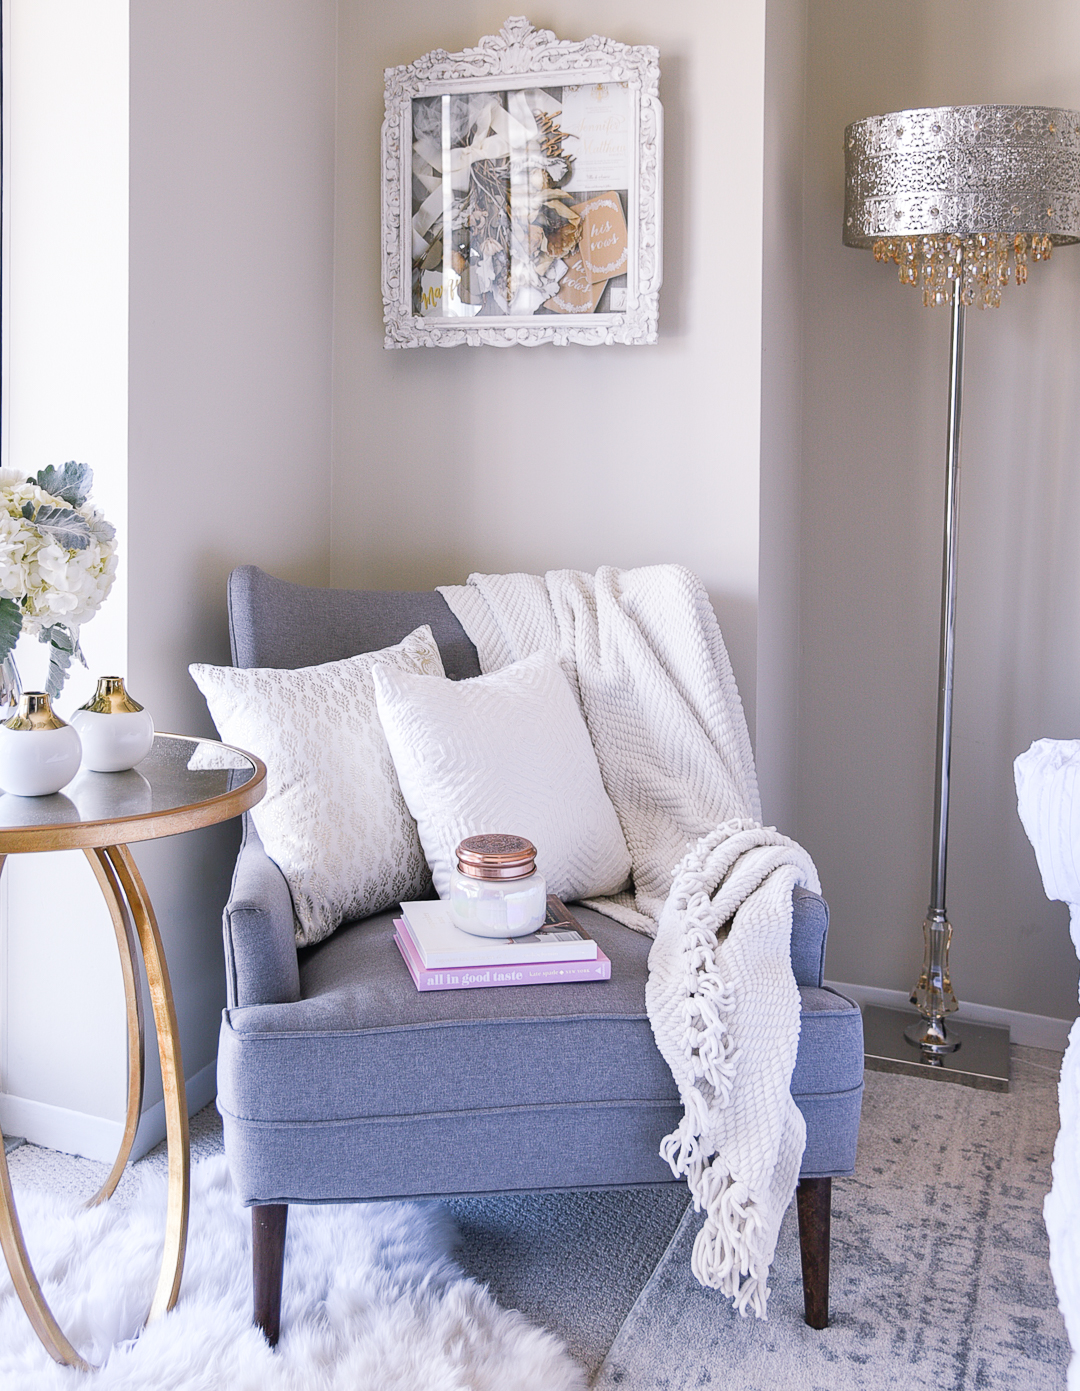 Simple tips on how to style a cozy corner